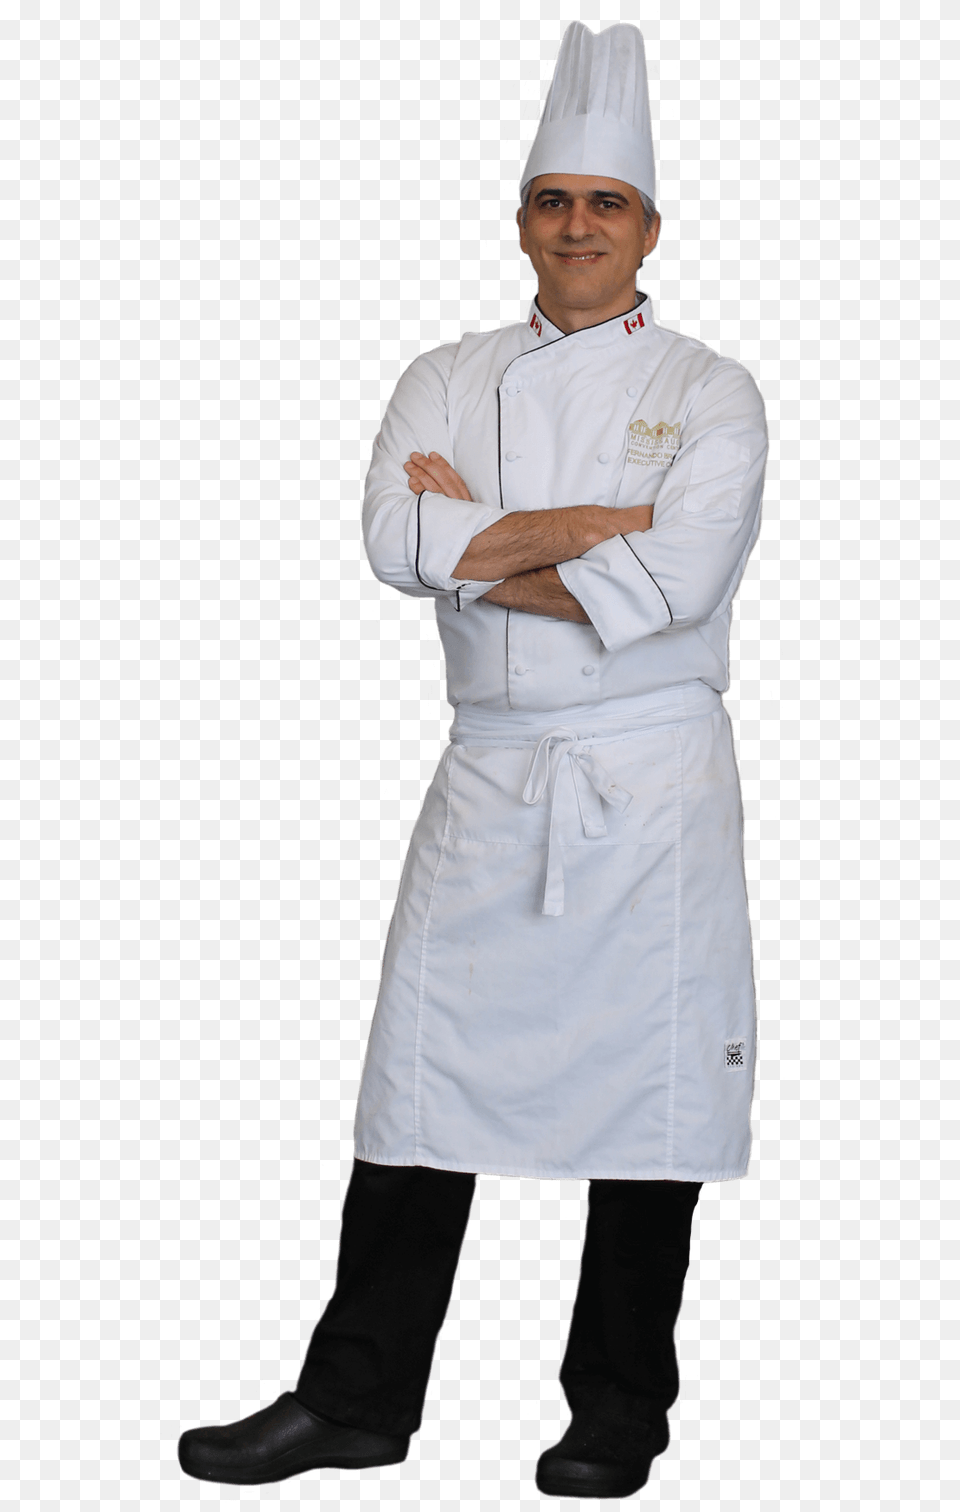 Chef, Clothing, Coat, Adult, Man Png Image